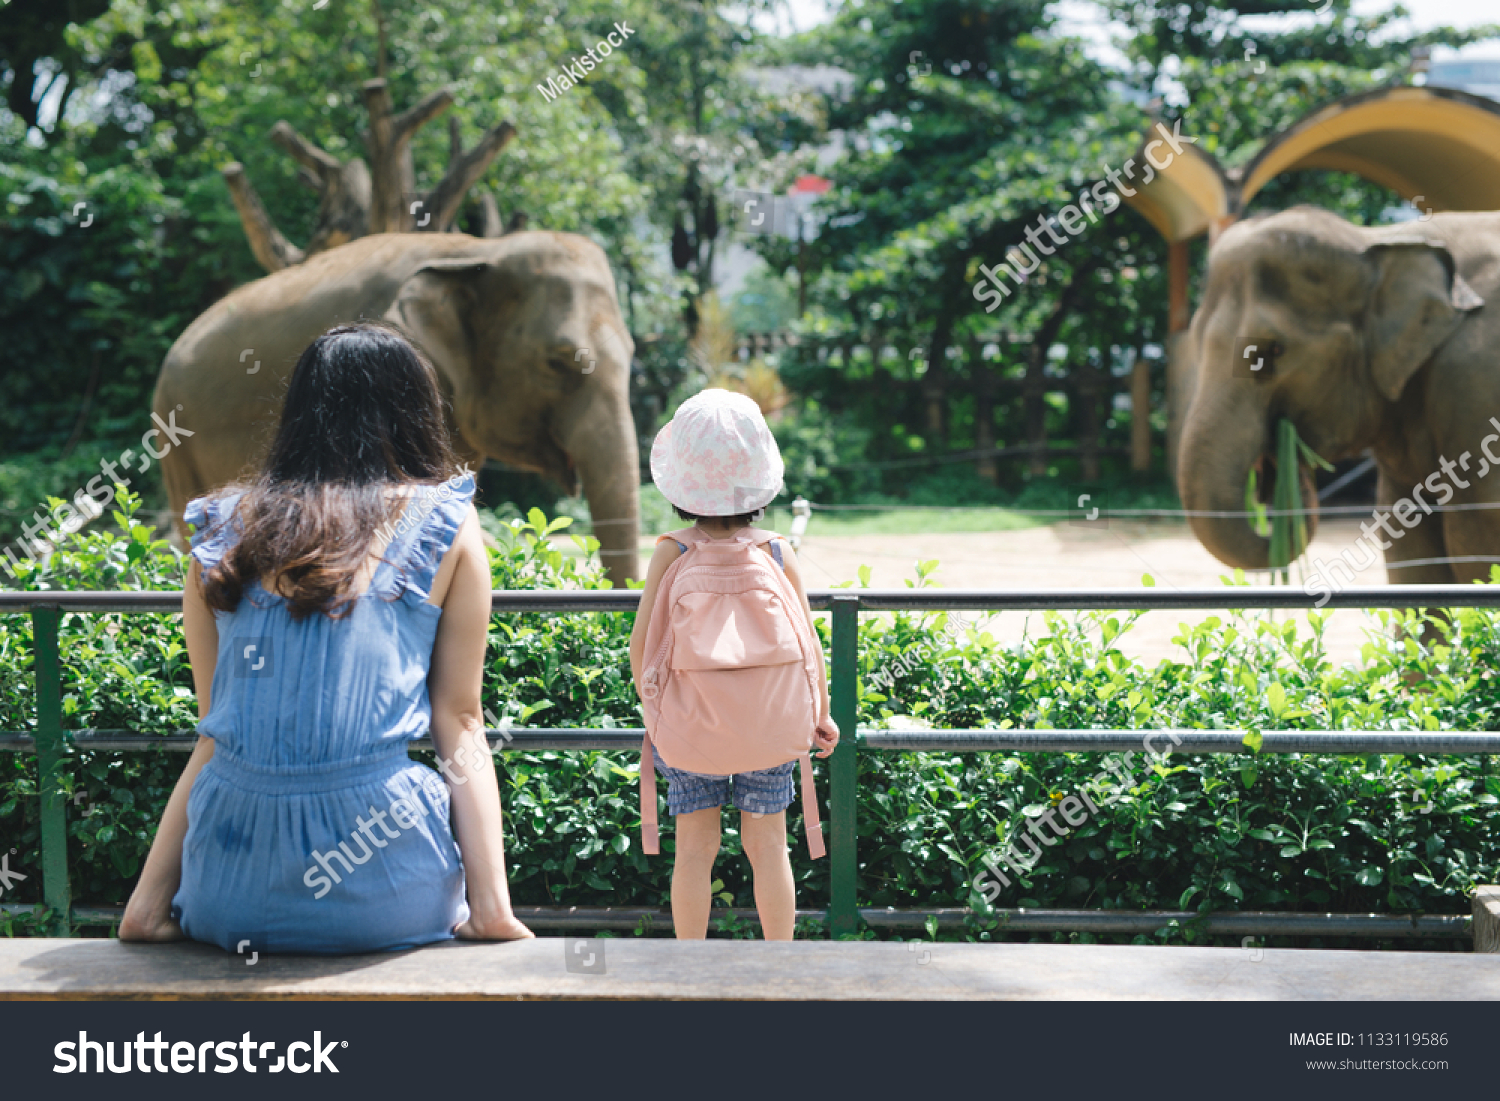 Happy mother and daughter watching and feeding elephants in zoo.  #1133119586